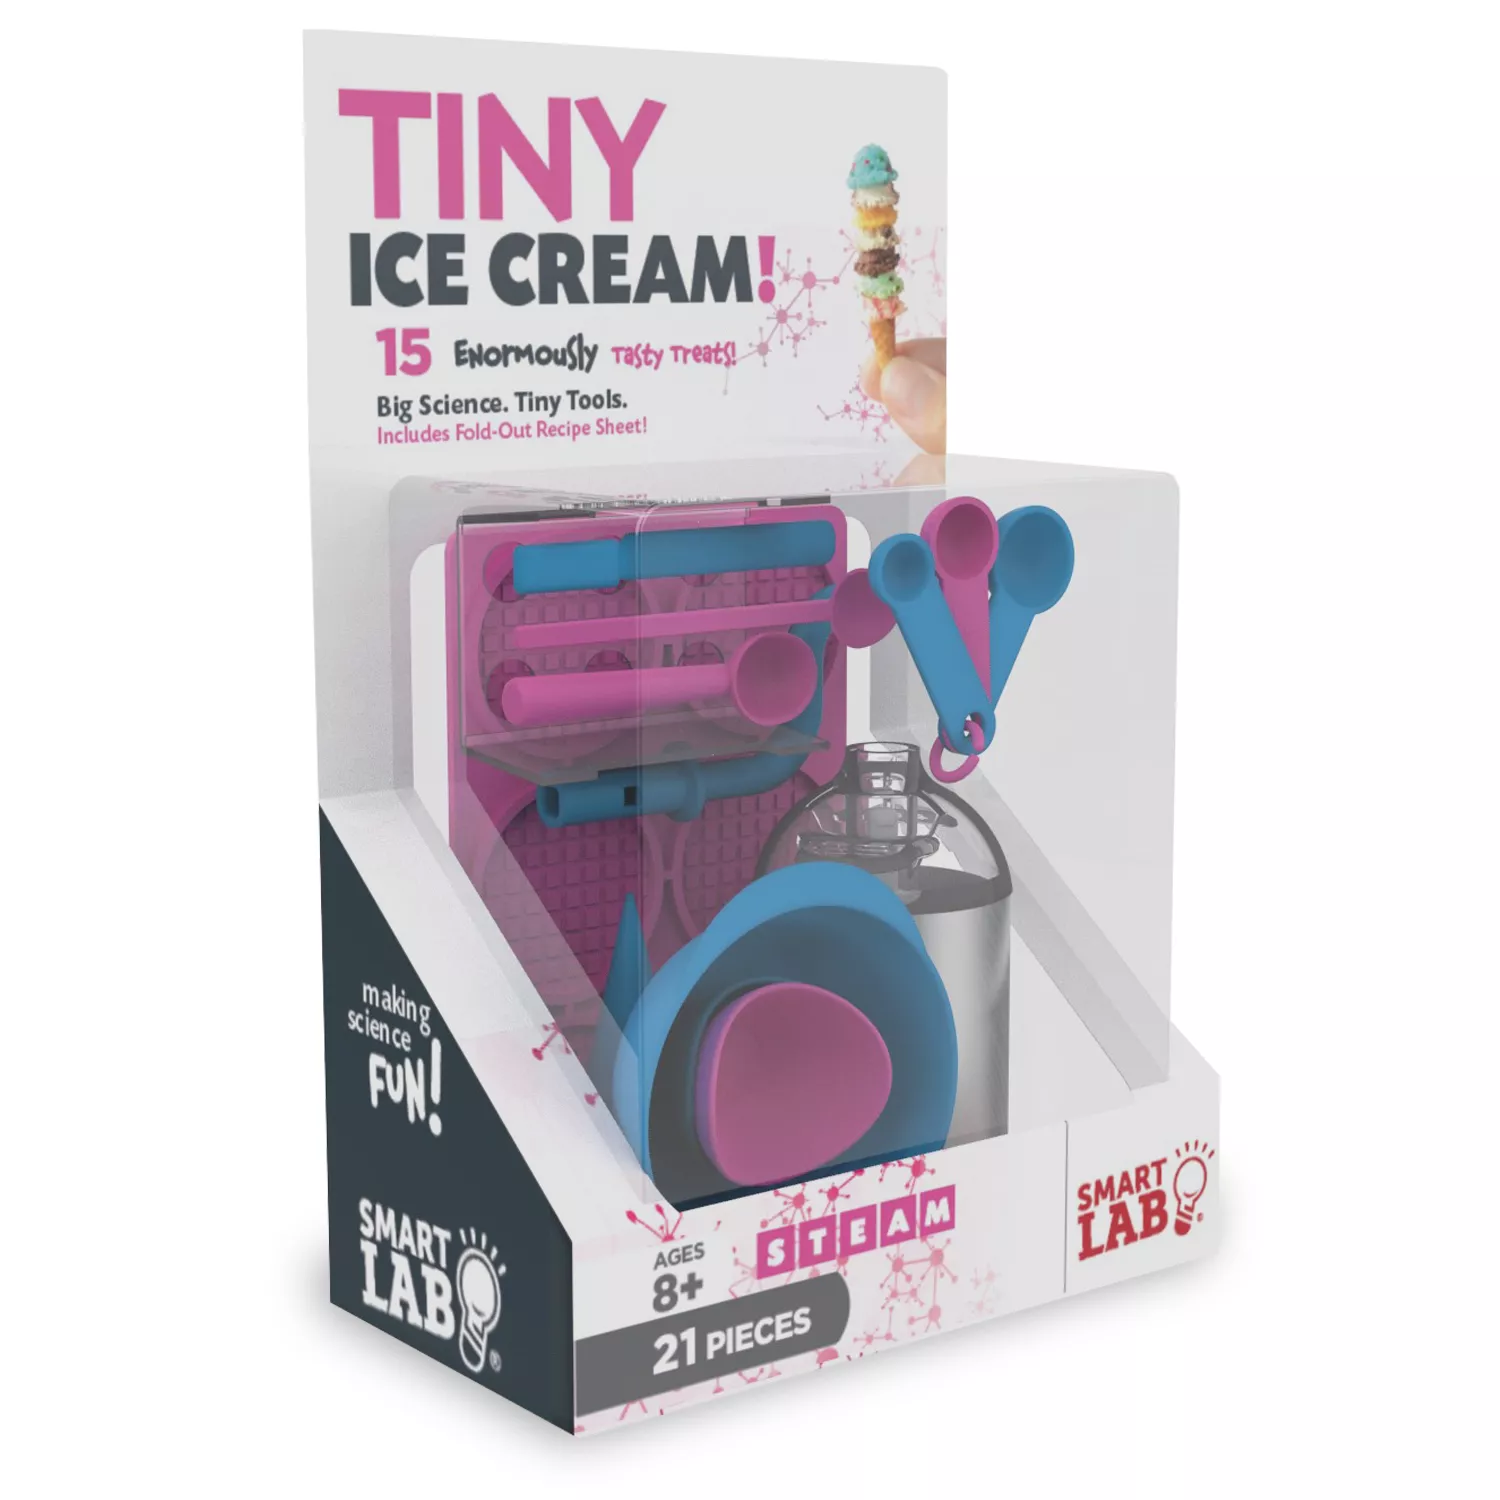 You Can Get a Tiny Ice Cream Making Kit and It's So Cute!